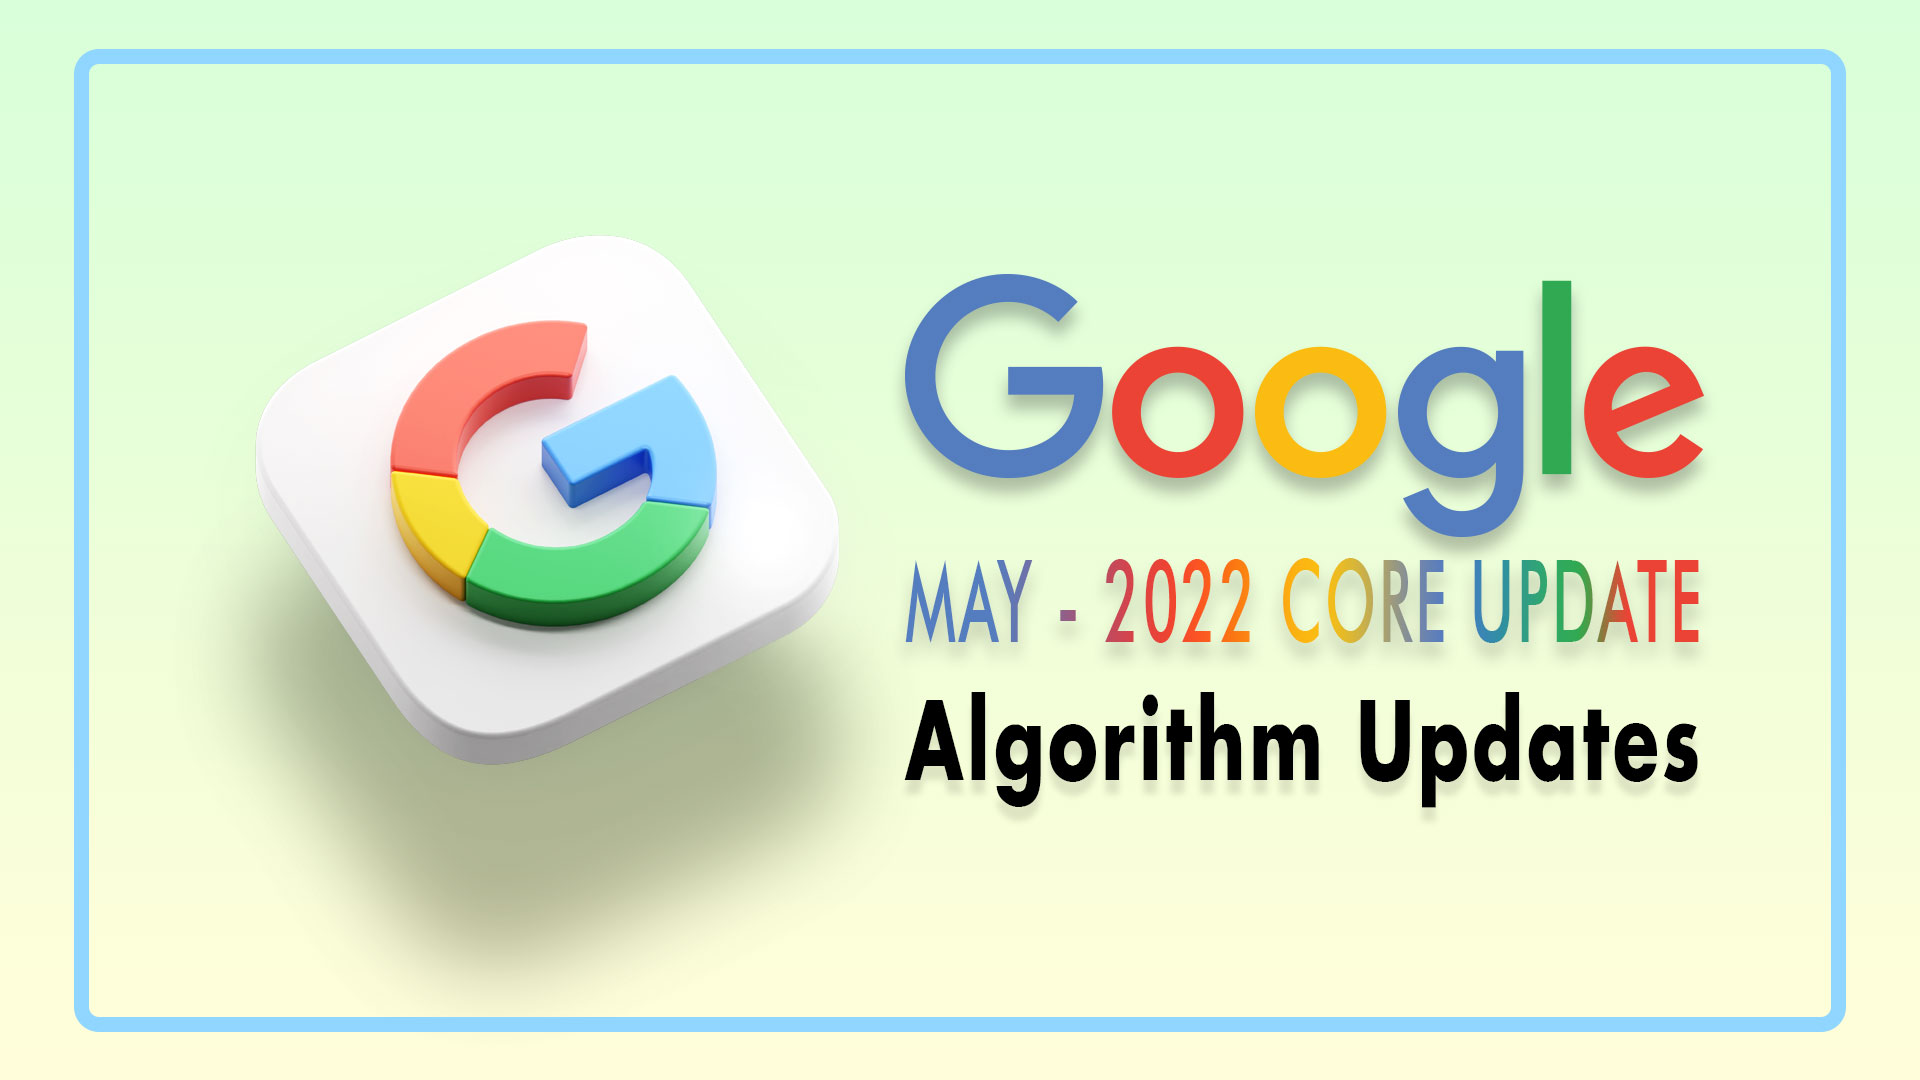 Everything To Know About Google May 2022 Core Update Algorithms